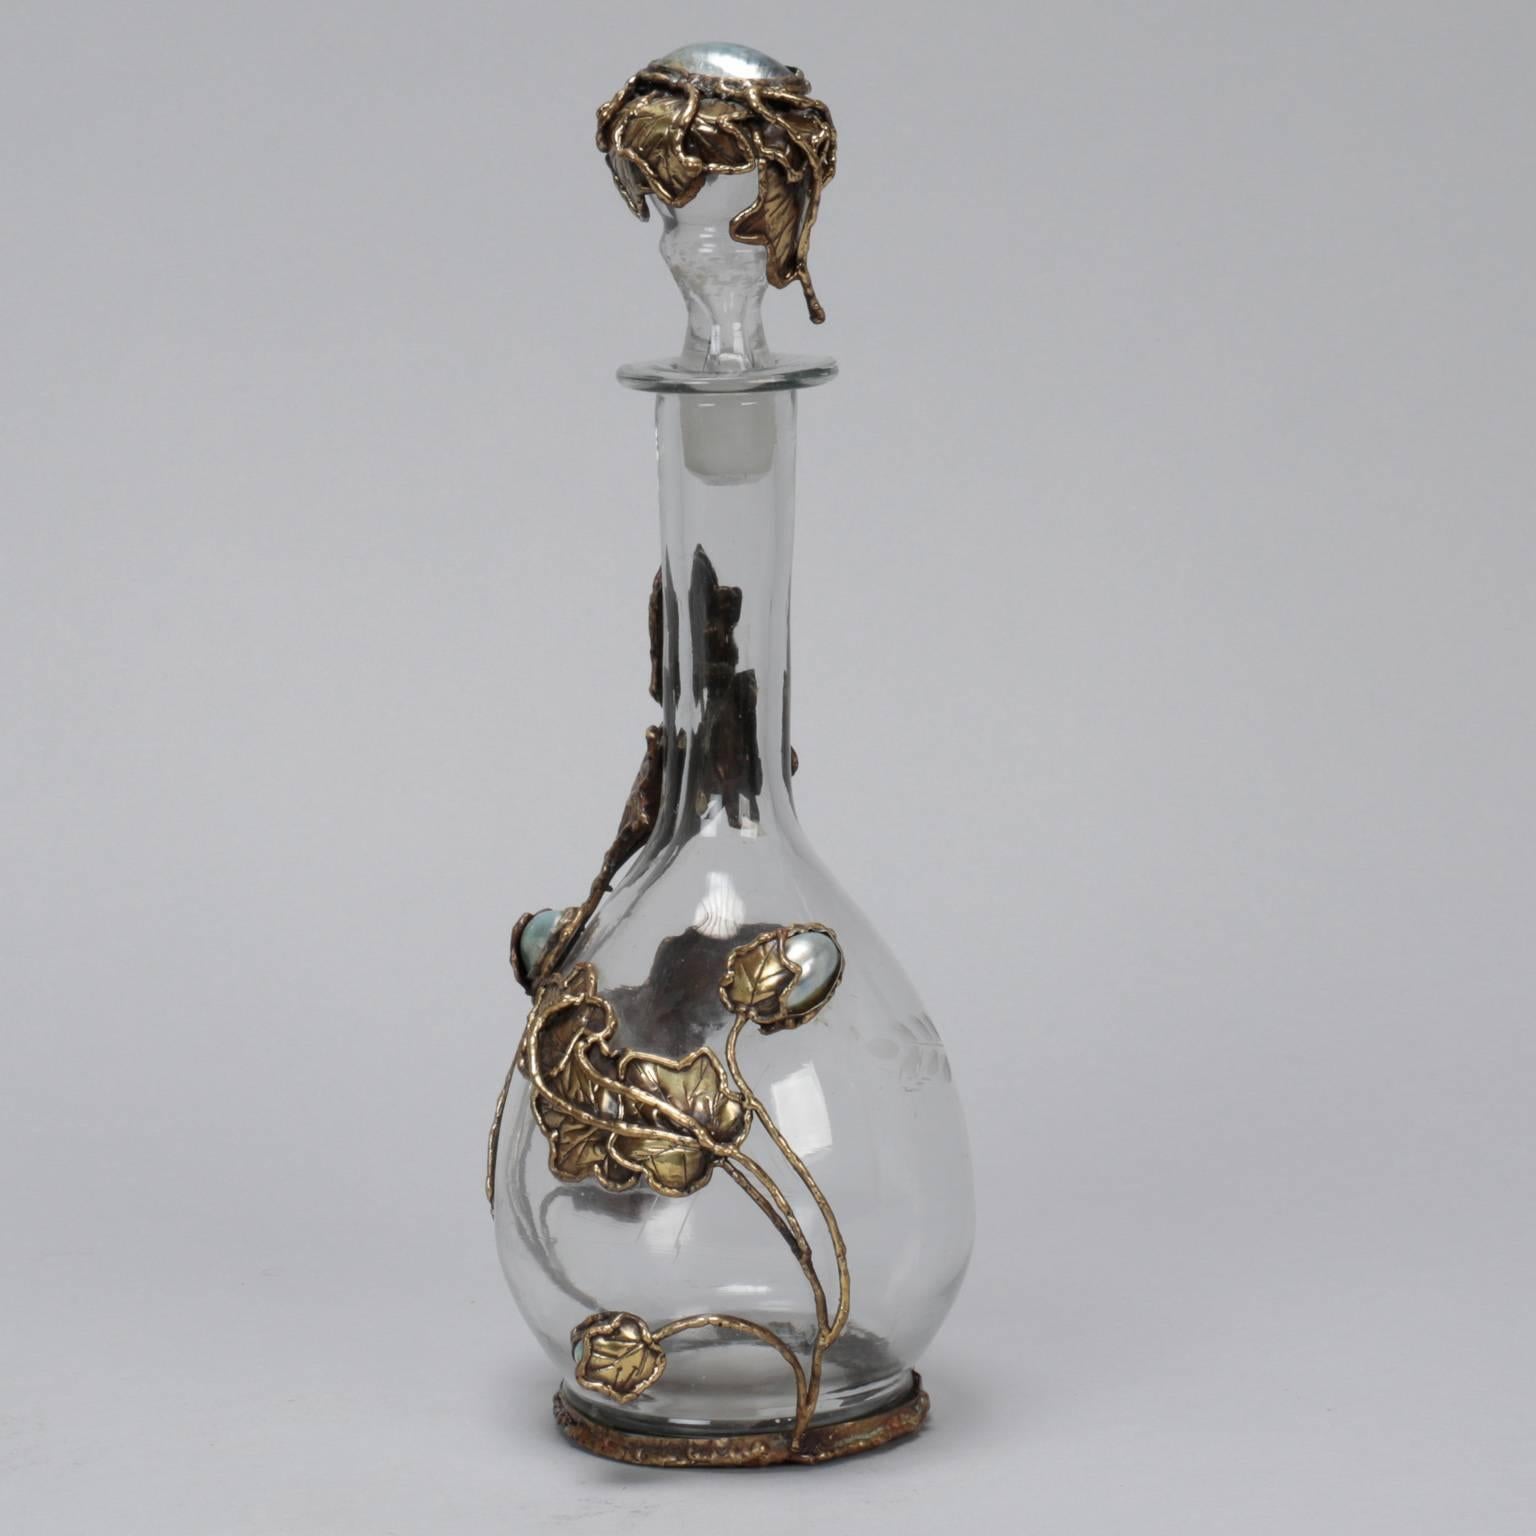 Found in Italy, this clear glass decanter has hand-forged brass toned metal leafy vines that wraparound the bottle and fresh water pearl accents. Signed by Lionel. Other pieces by this artist also available. Please inquire.